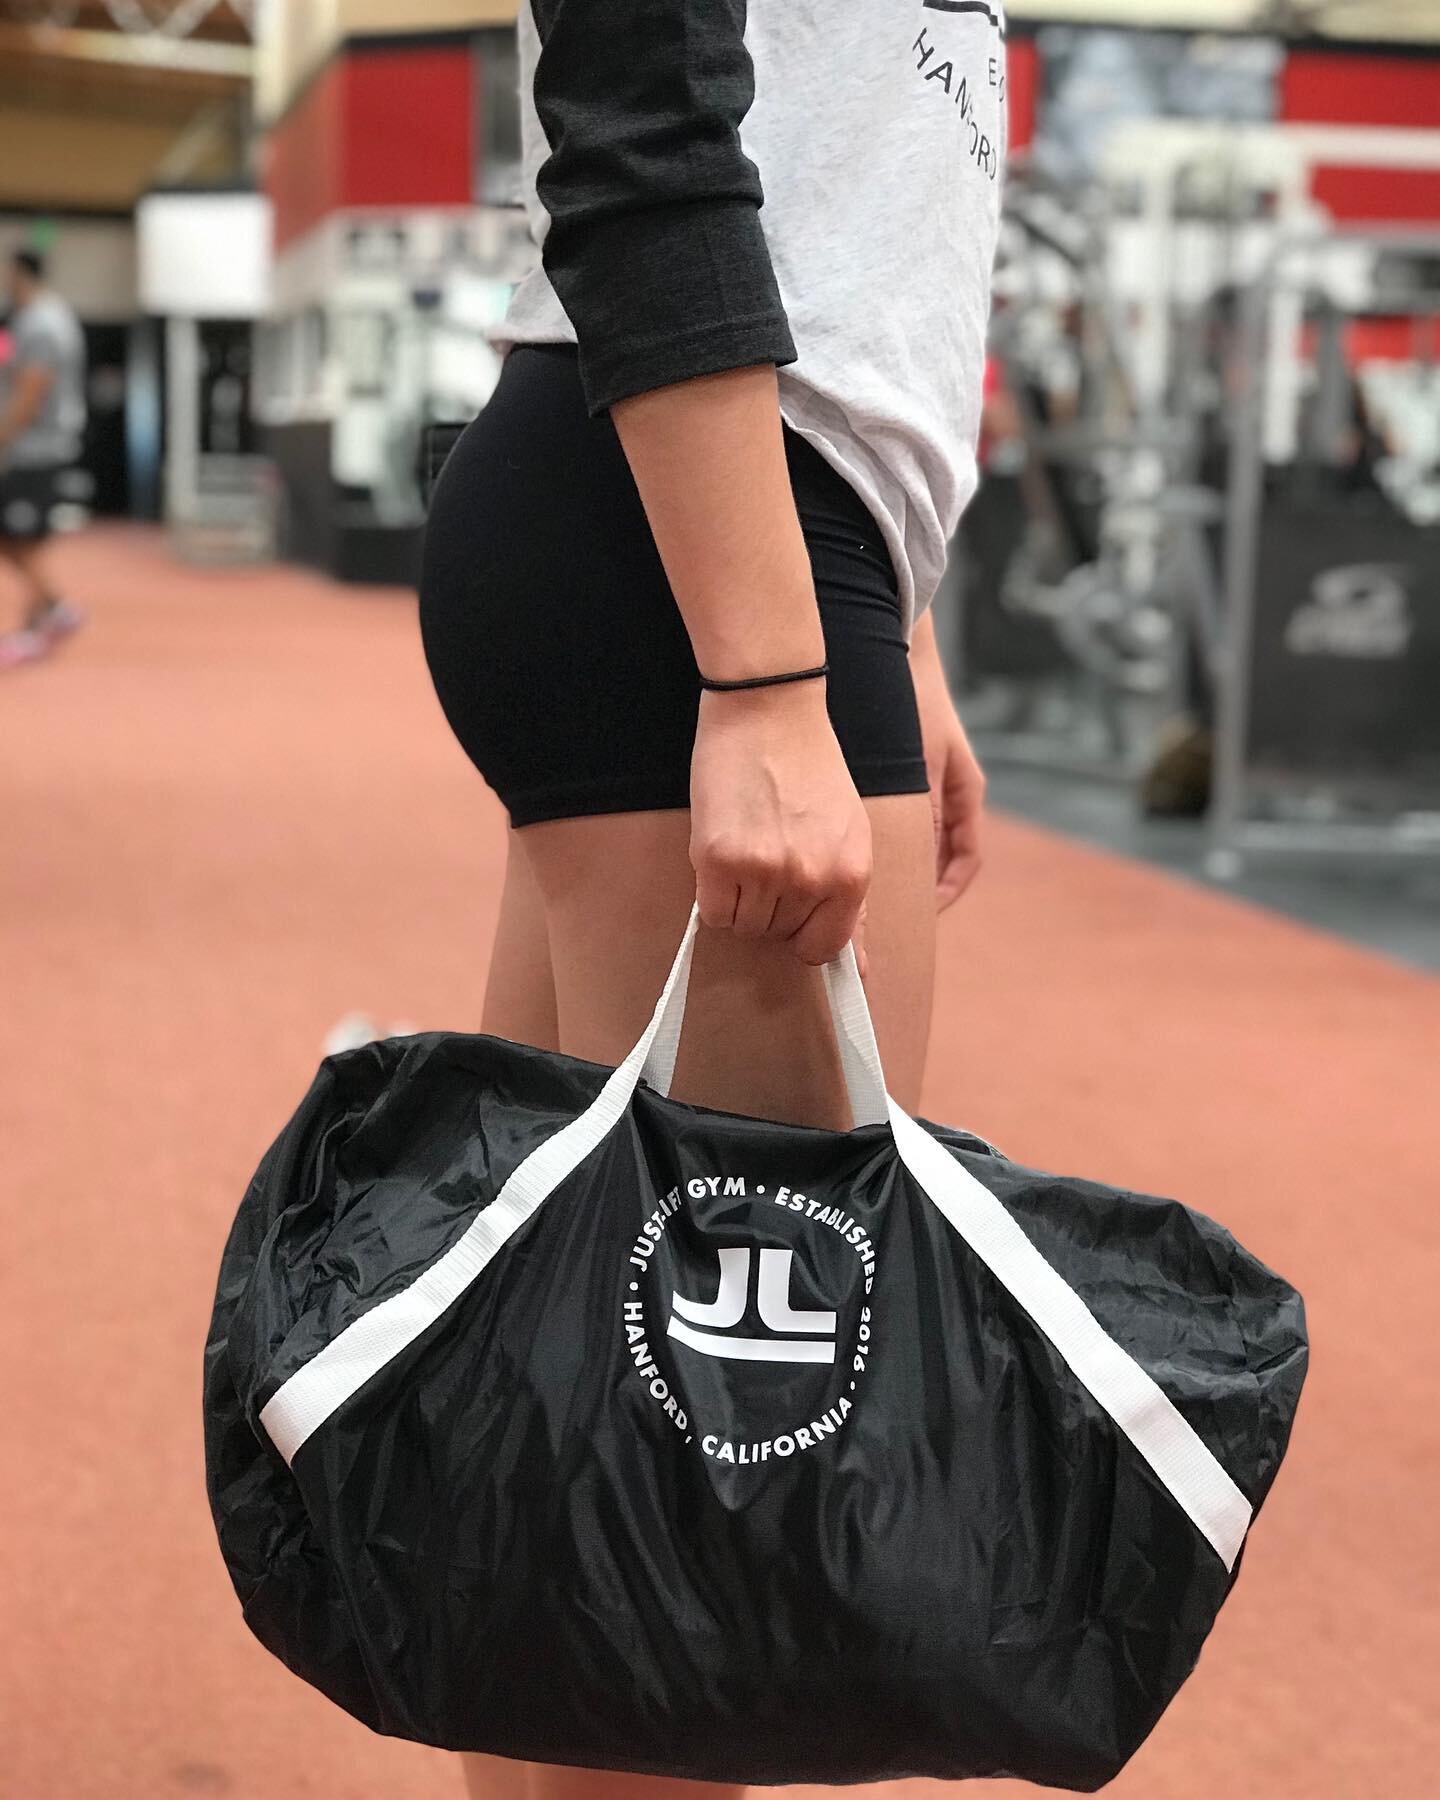 Free Bag When you sign up!!! While supplies last. #justliftgym